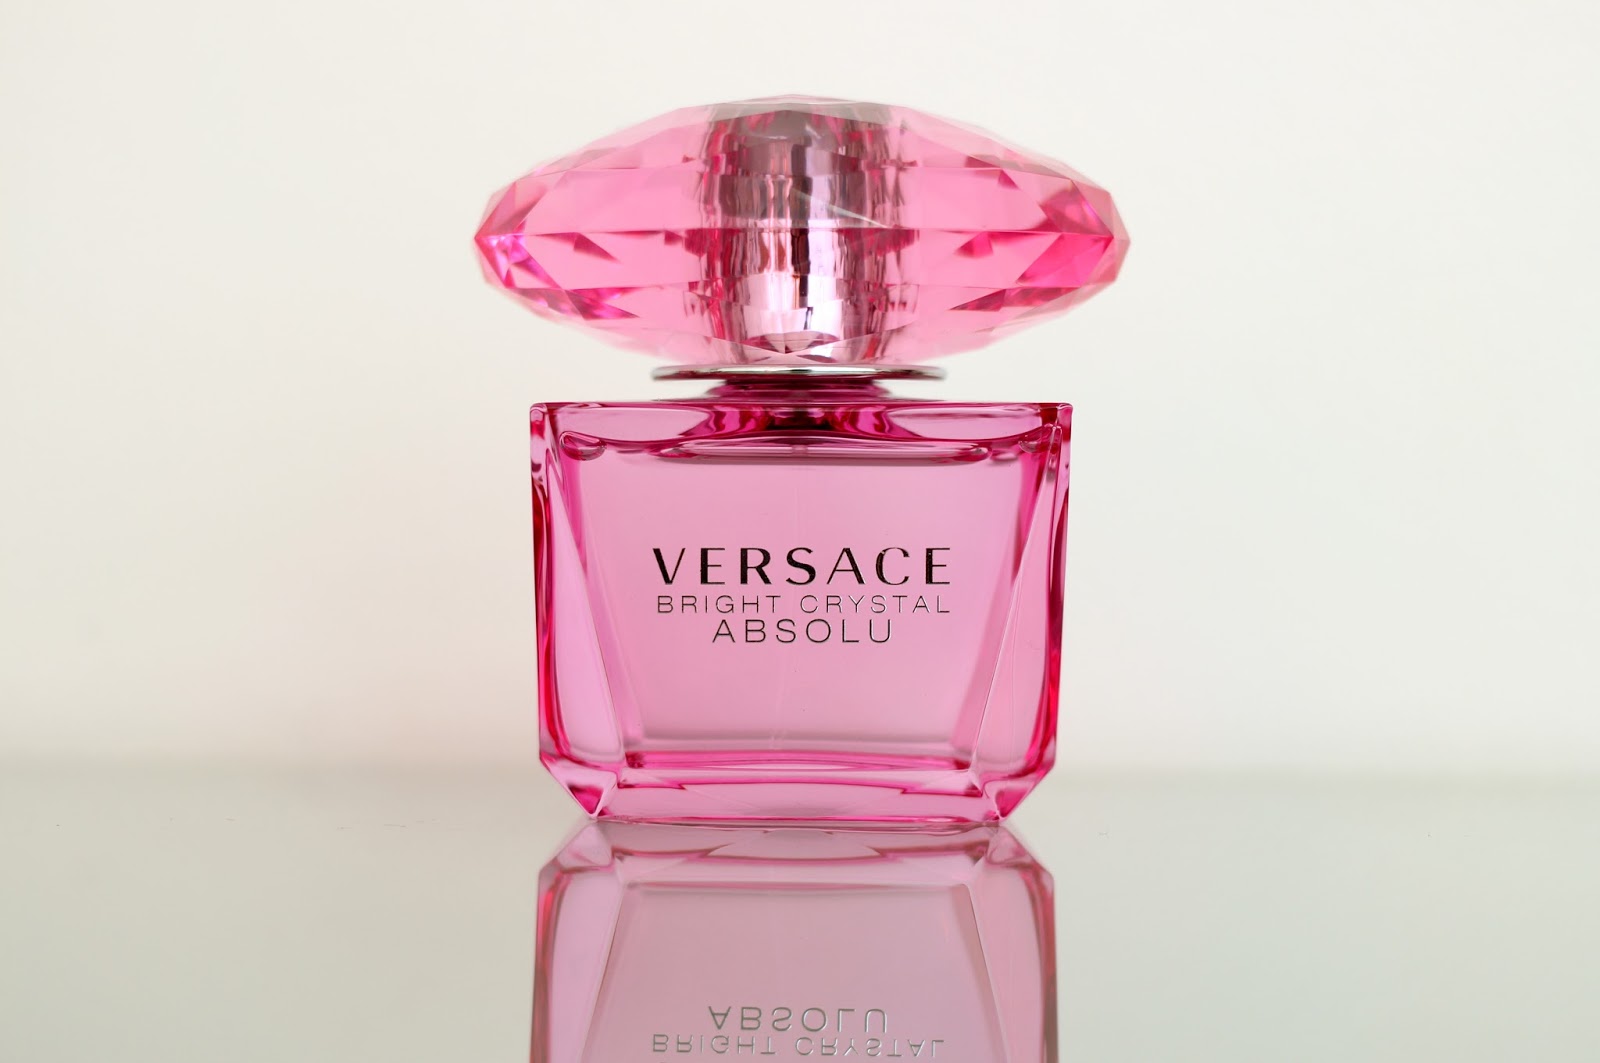 Versace Bright Crystal Absolu Review